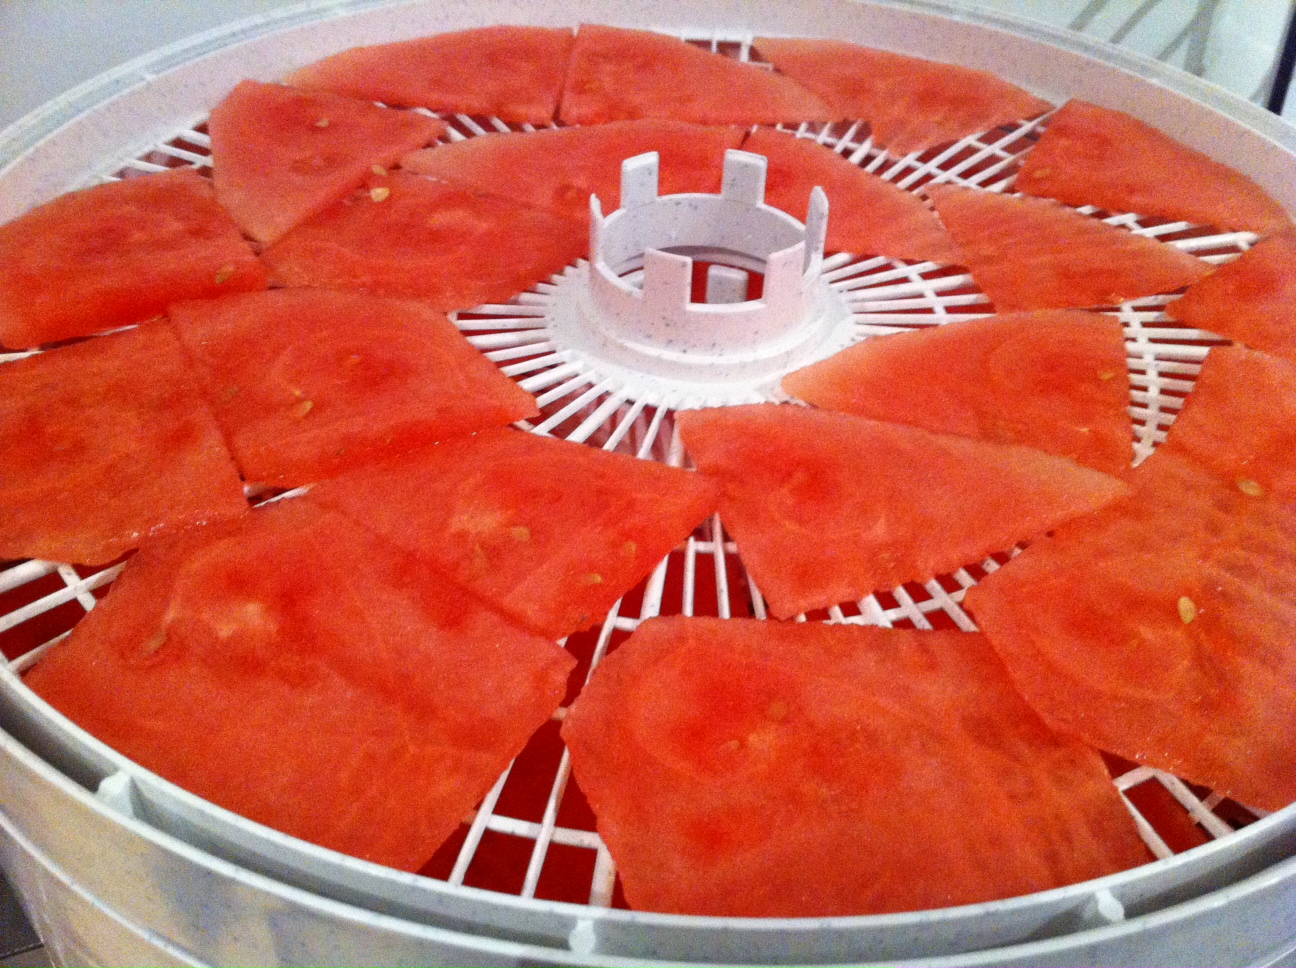 Watermelon sliced thin in the dehydrator (before dehydrating)